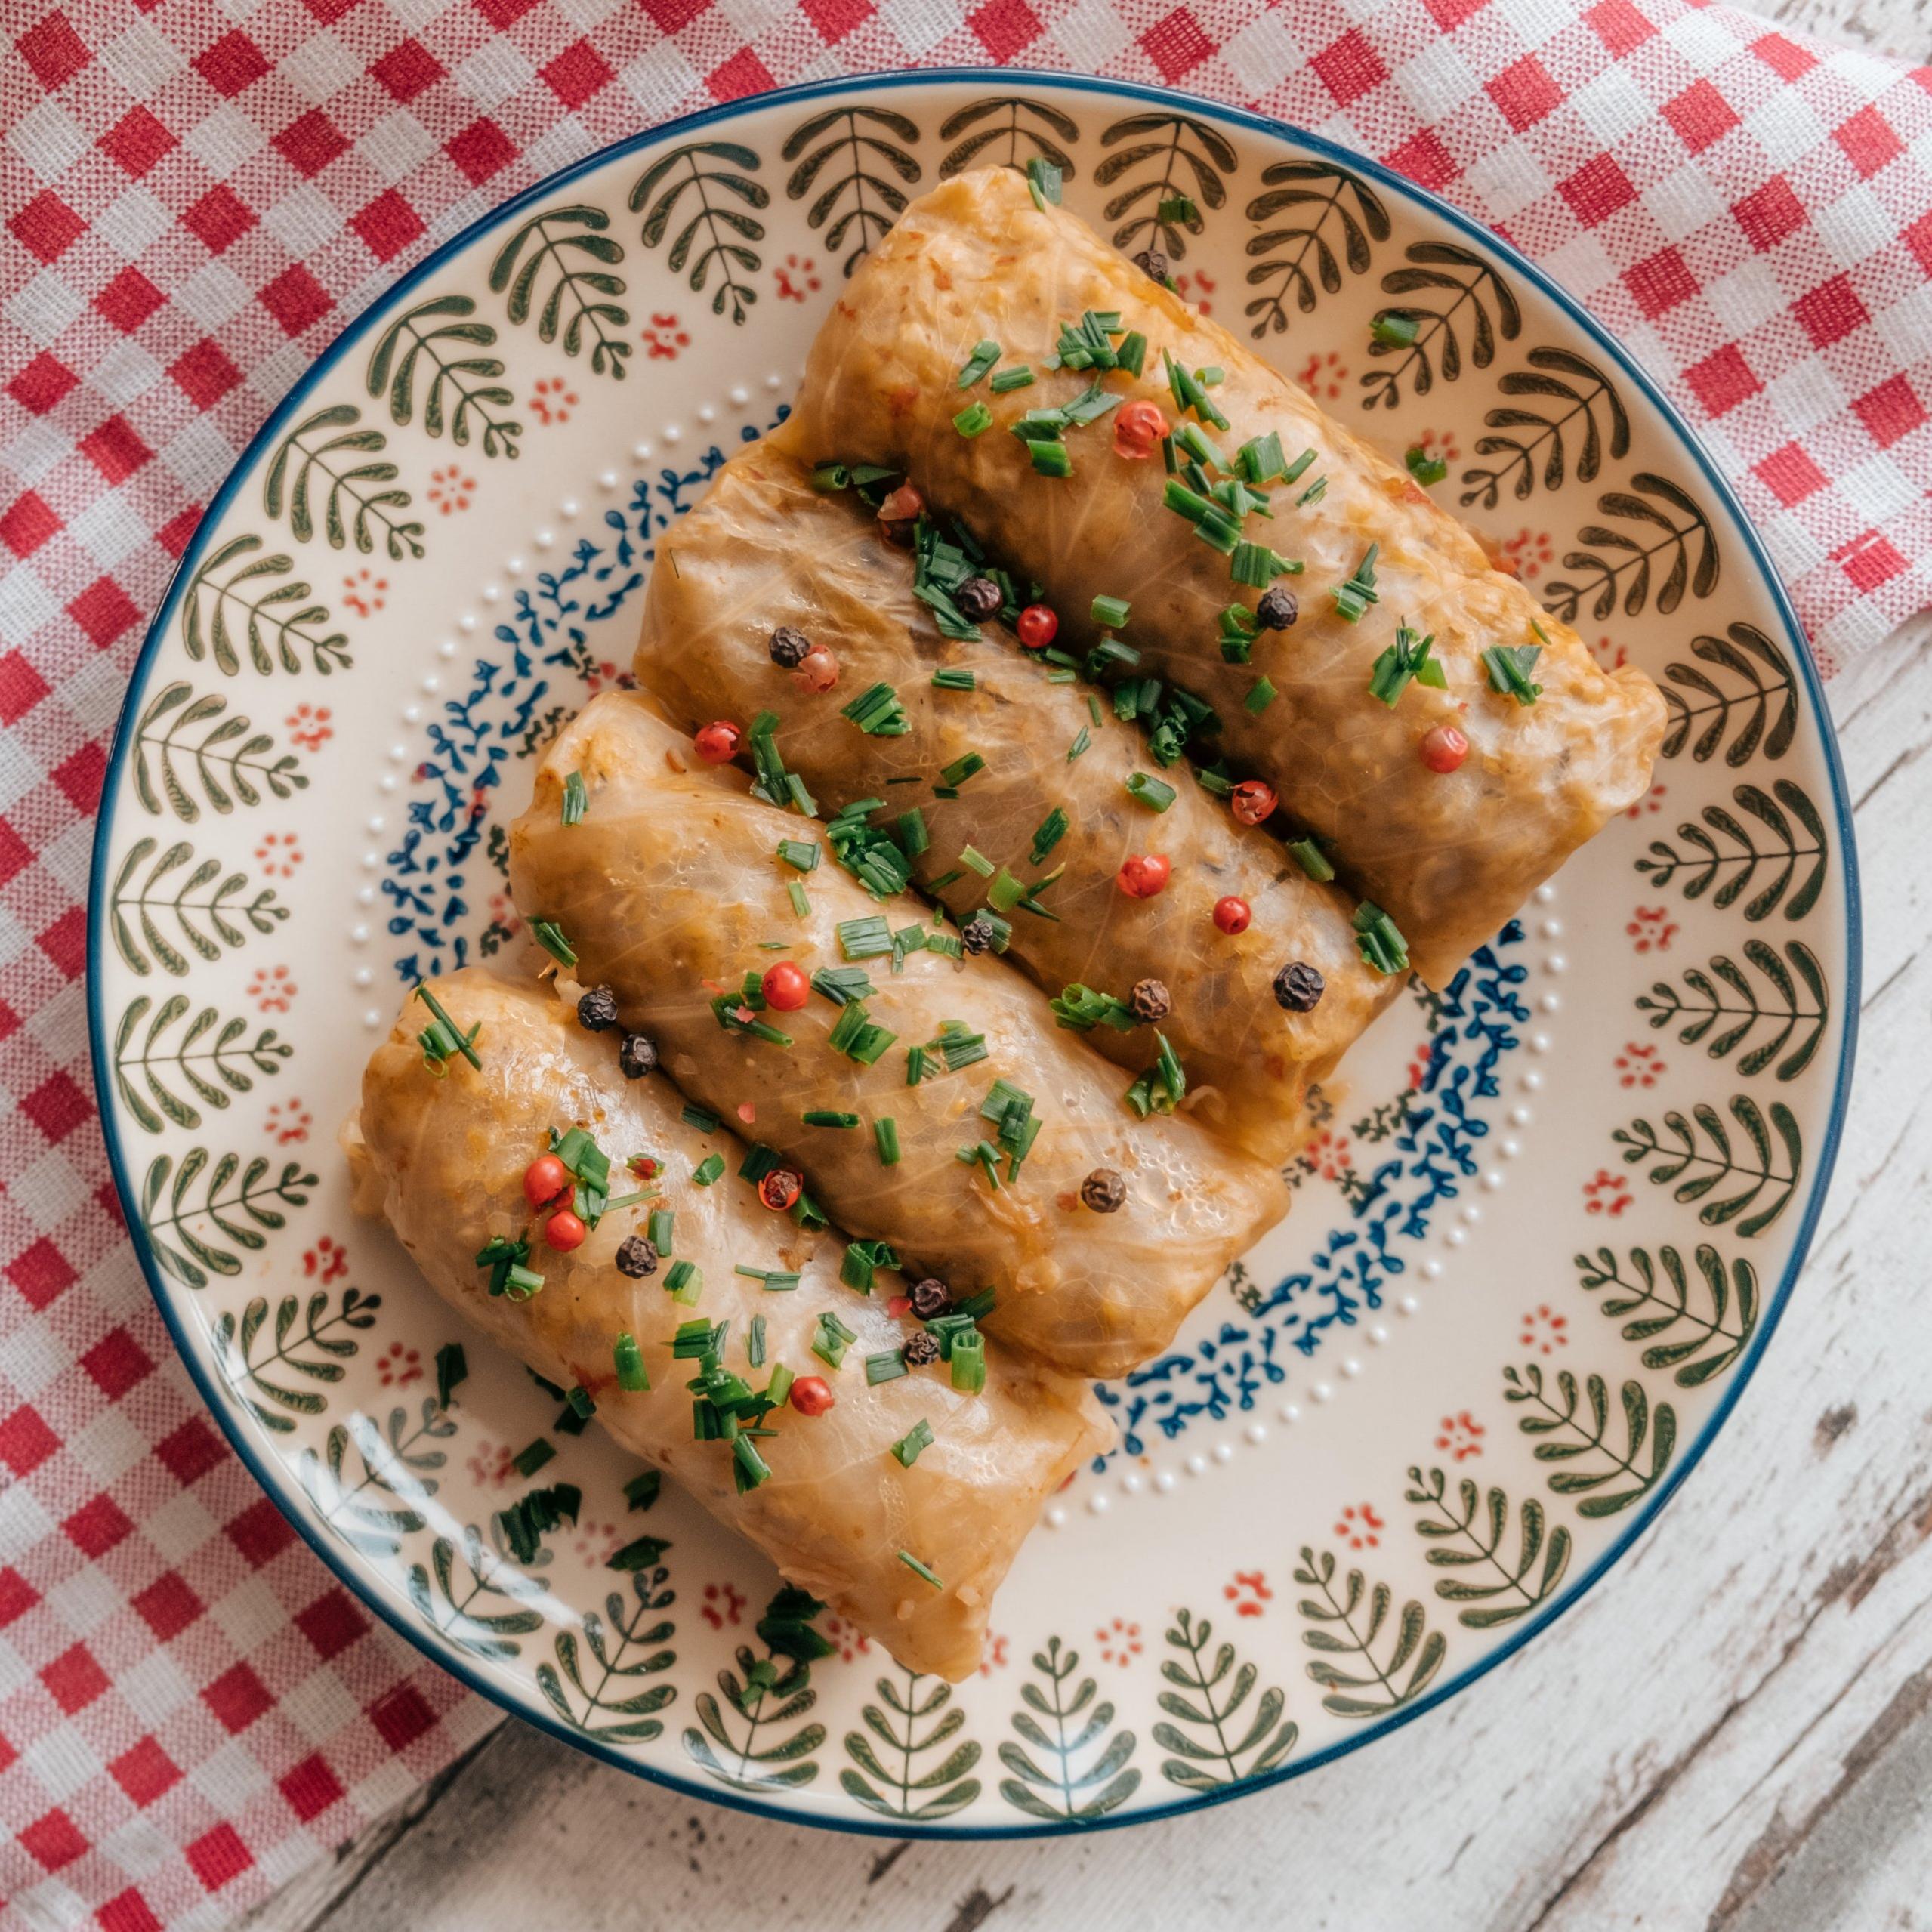  These savory vegetarian sarmale are the perfect comfort food.